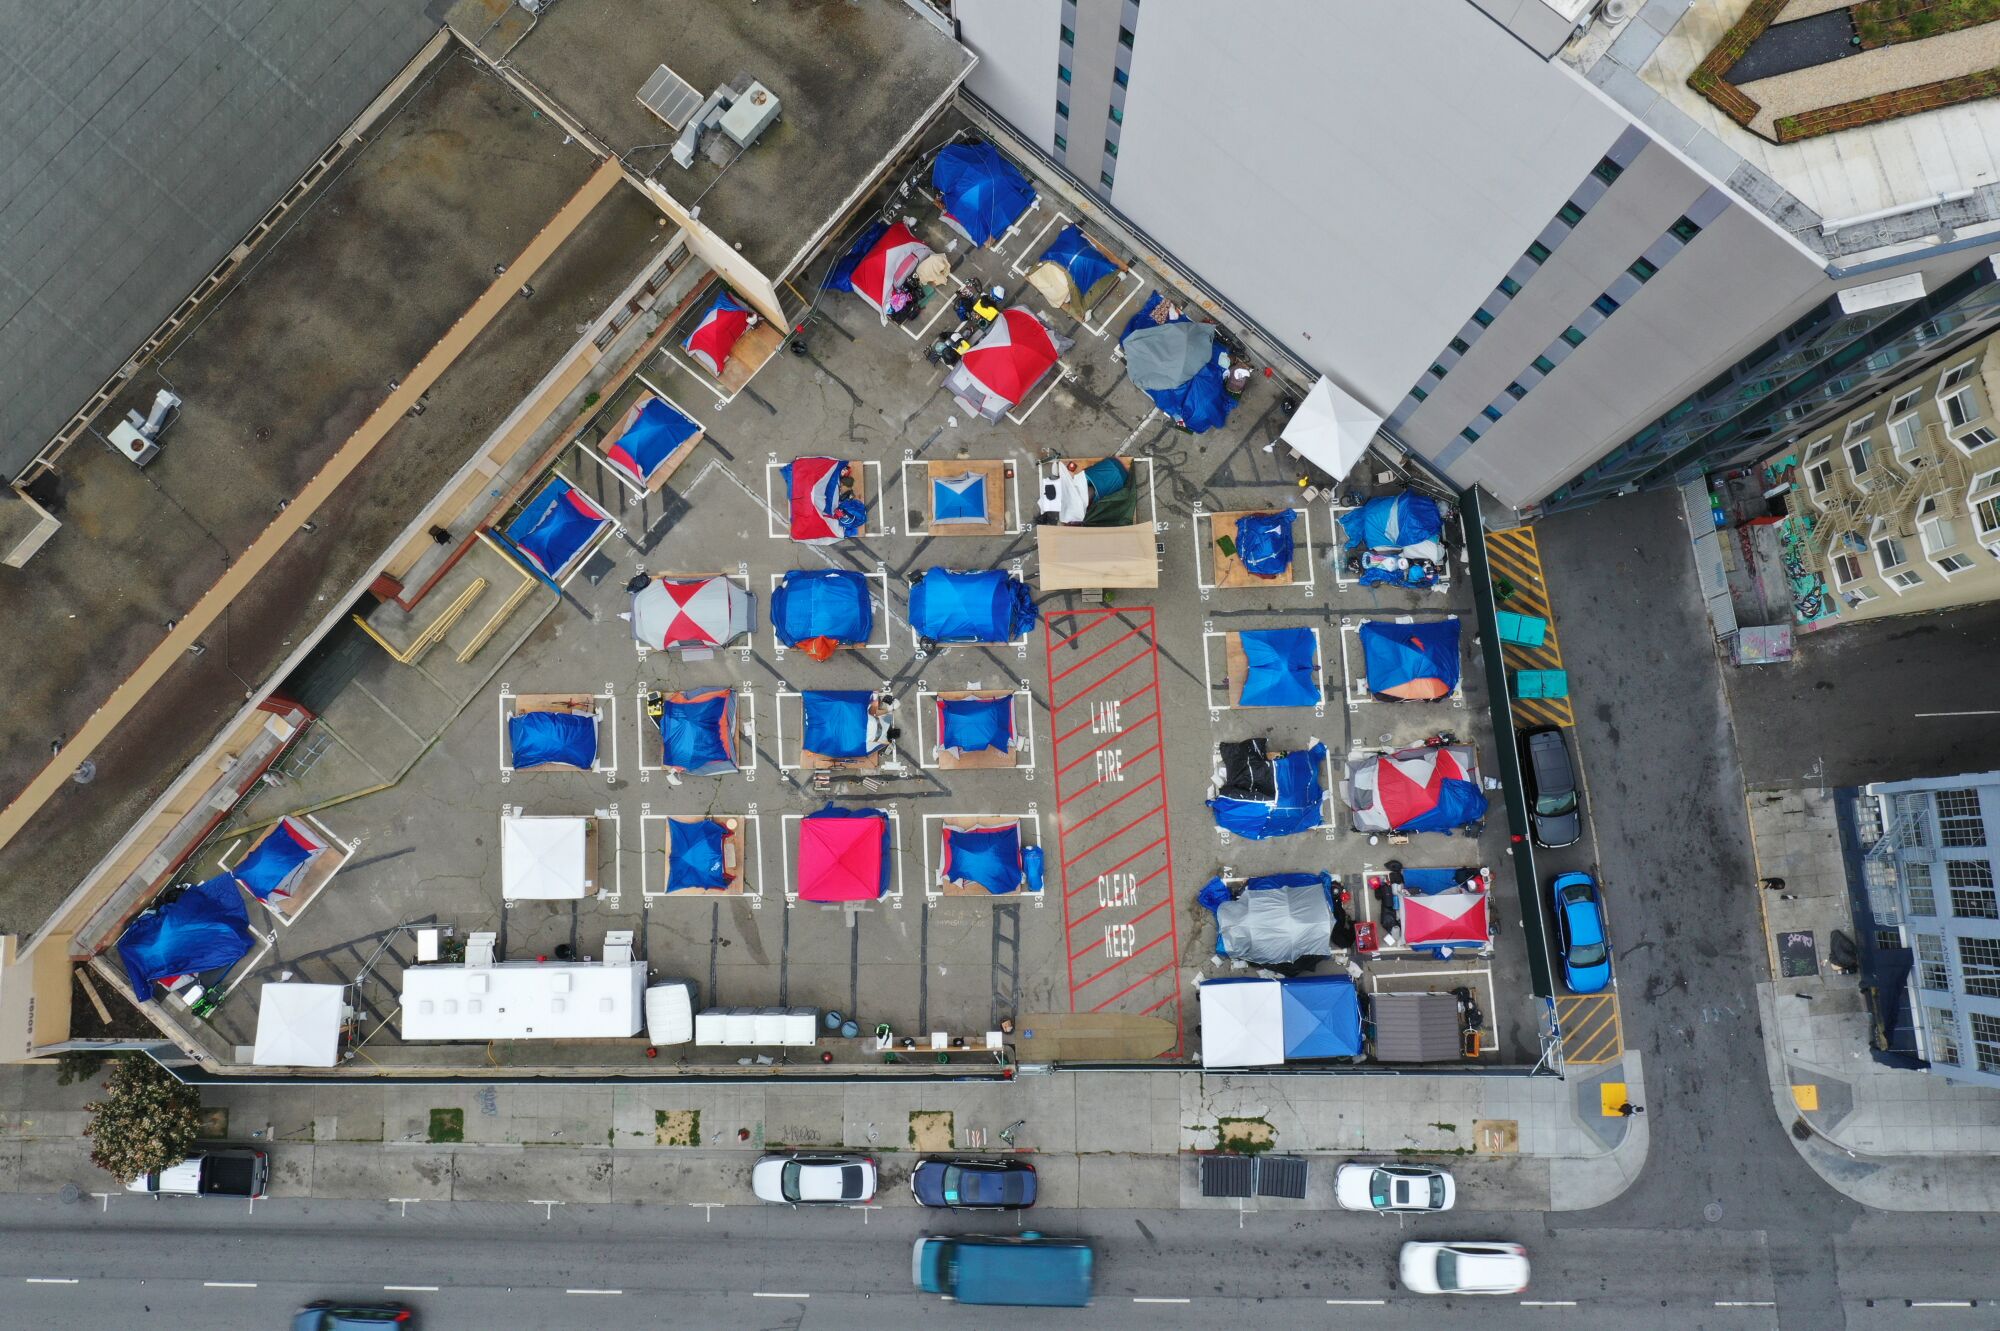 Aerial view of tents in a city lot